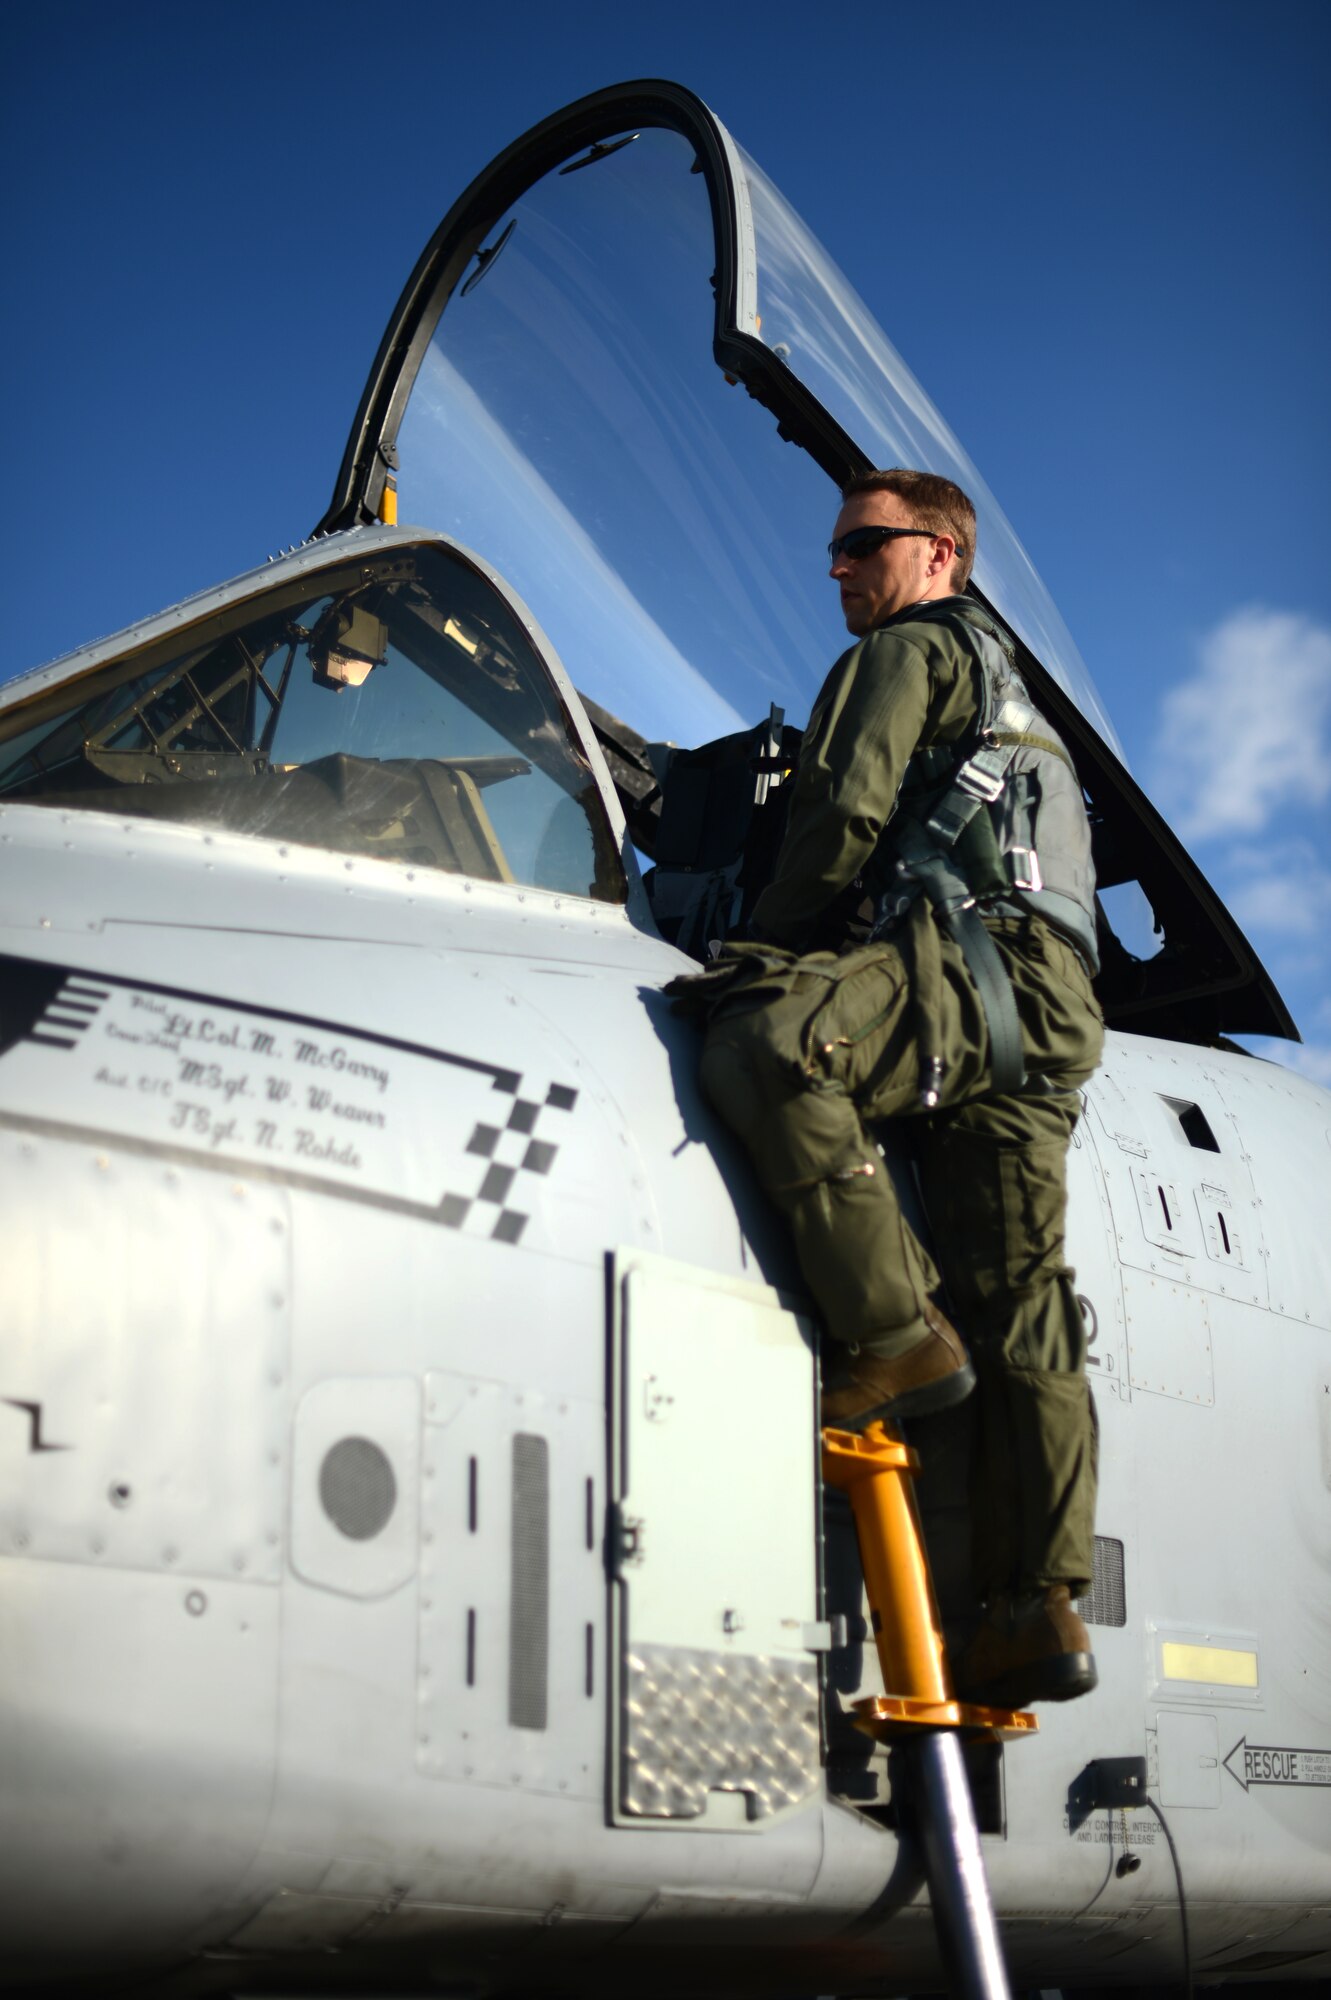 U.S. Air Force Capt. Tom Silkowski, 190th Fighter Squadron pilot from Bozrah, Conn., exits a U.S. Air Force A-10 Thunderbolt II attack aircraft on the flightline at Spangdahlem Air Base, Germany, May 16, 2014. Aircraft from the 190th FS arrived in Germany to support Exercise Combined Resolve II. The exercise focuses on training with NATO allies to bring close air support application to real-world scenarios. (U.S. Air Force photo by Senior Airman Gustavo Castillo)